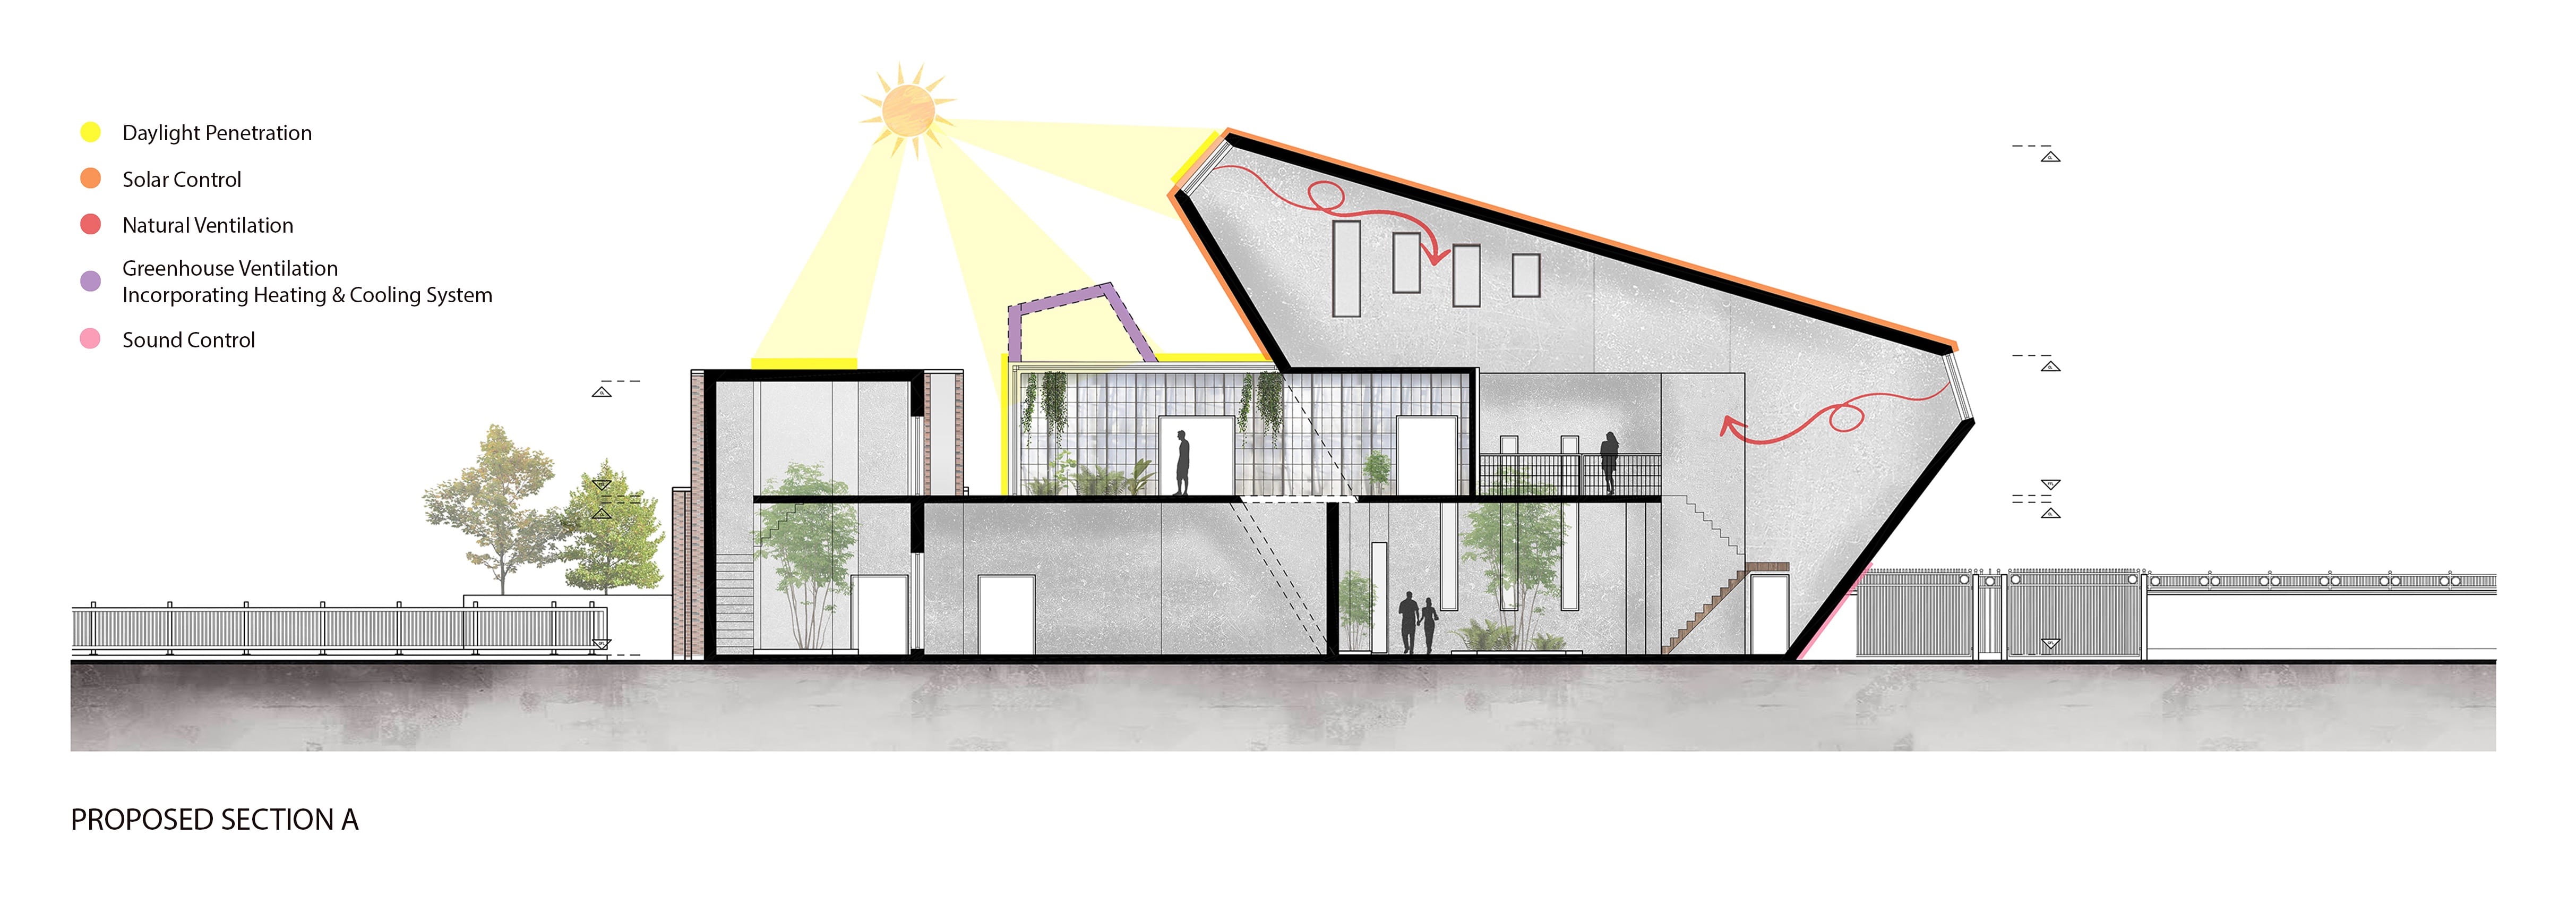 Sectional of building design showing how light enters the building